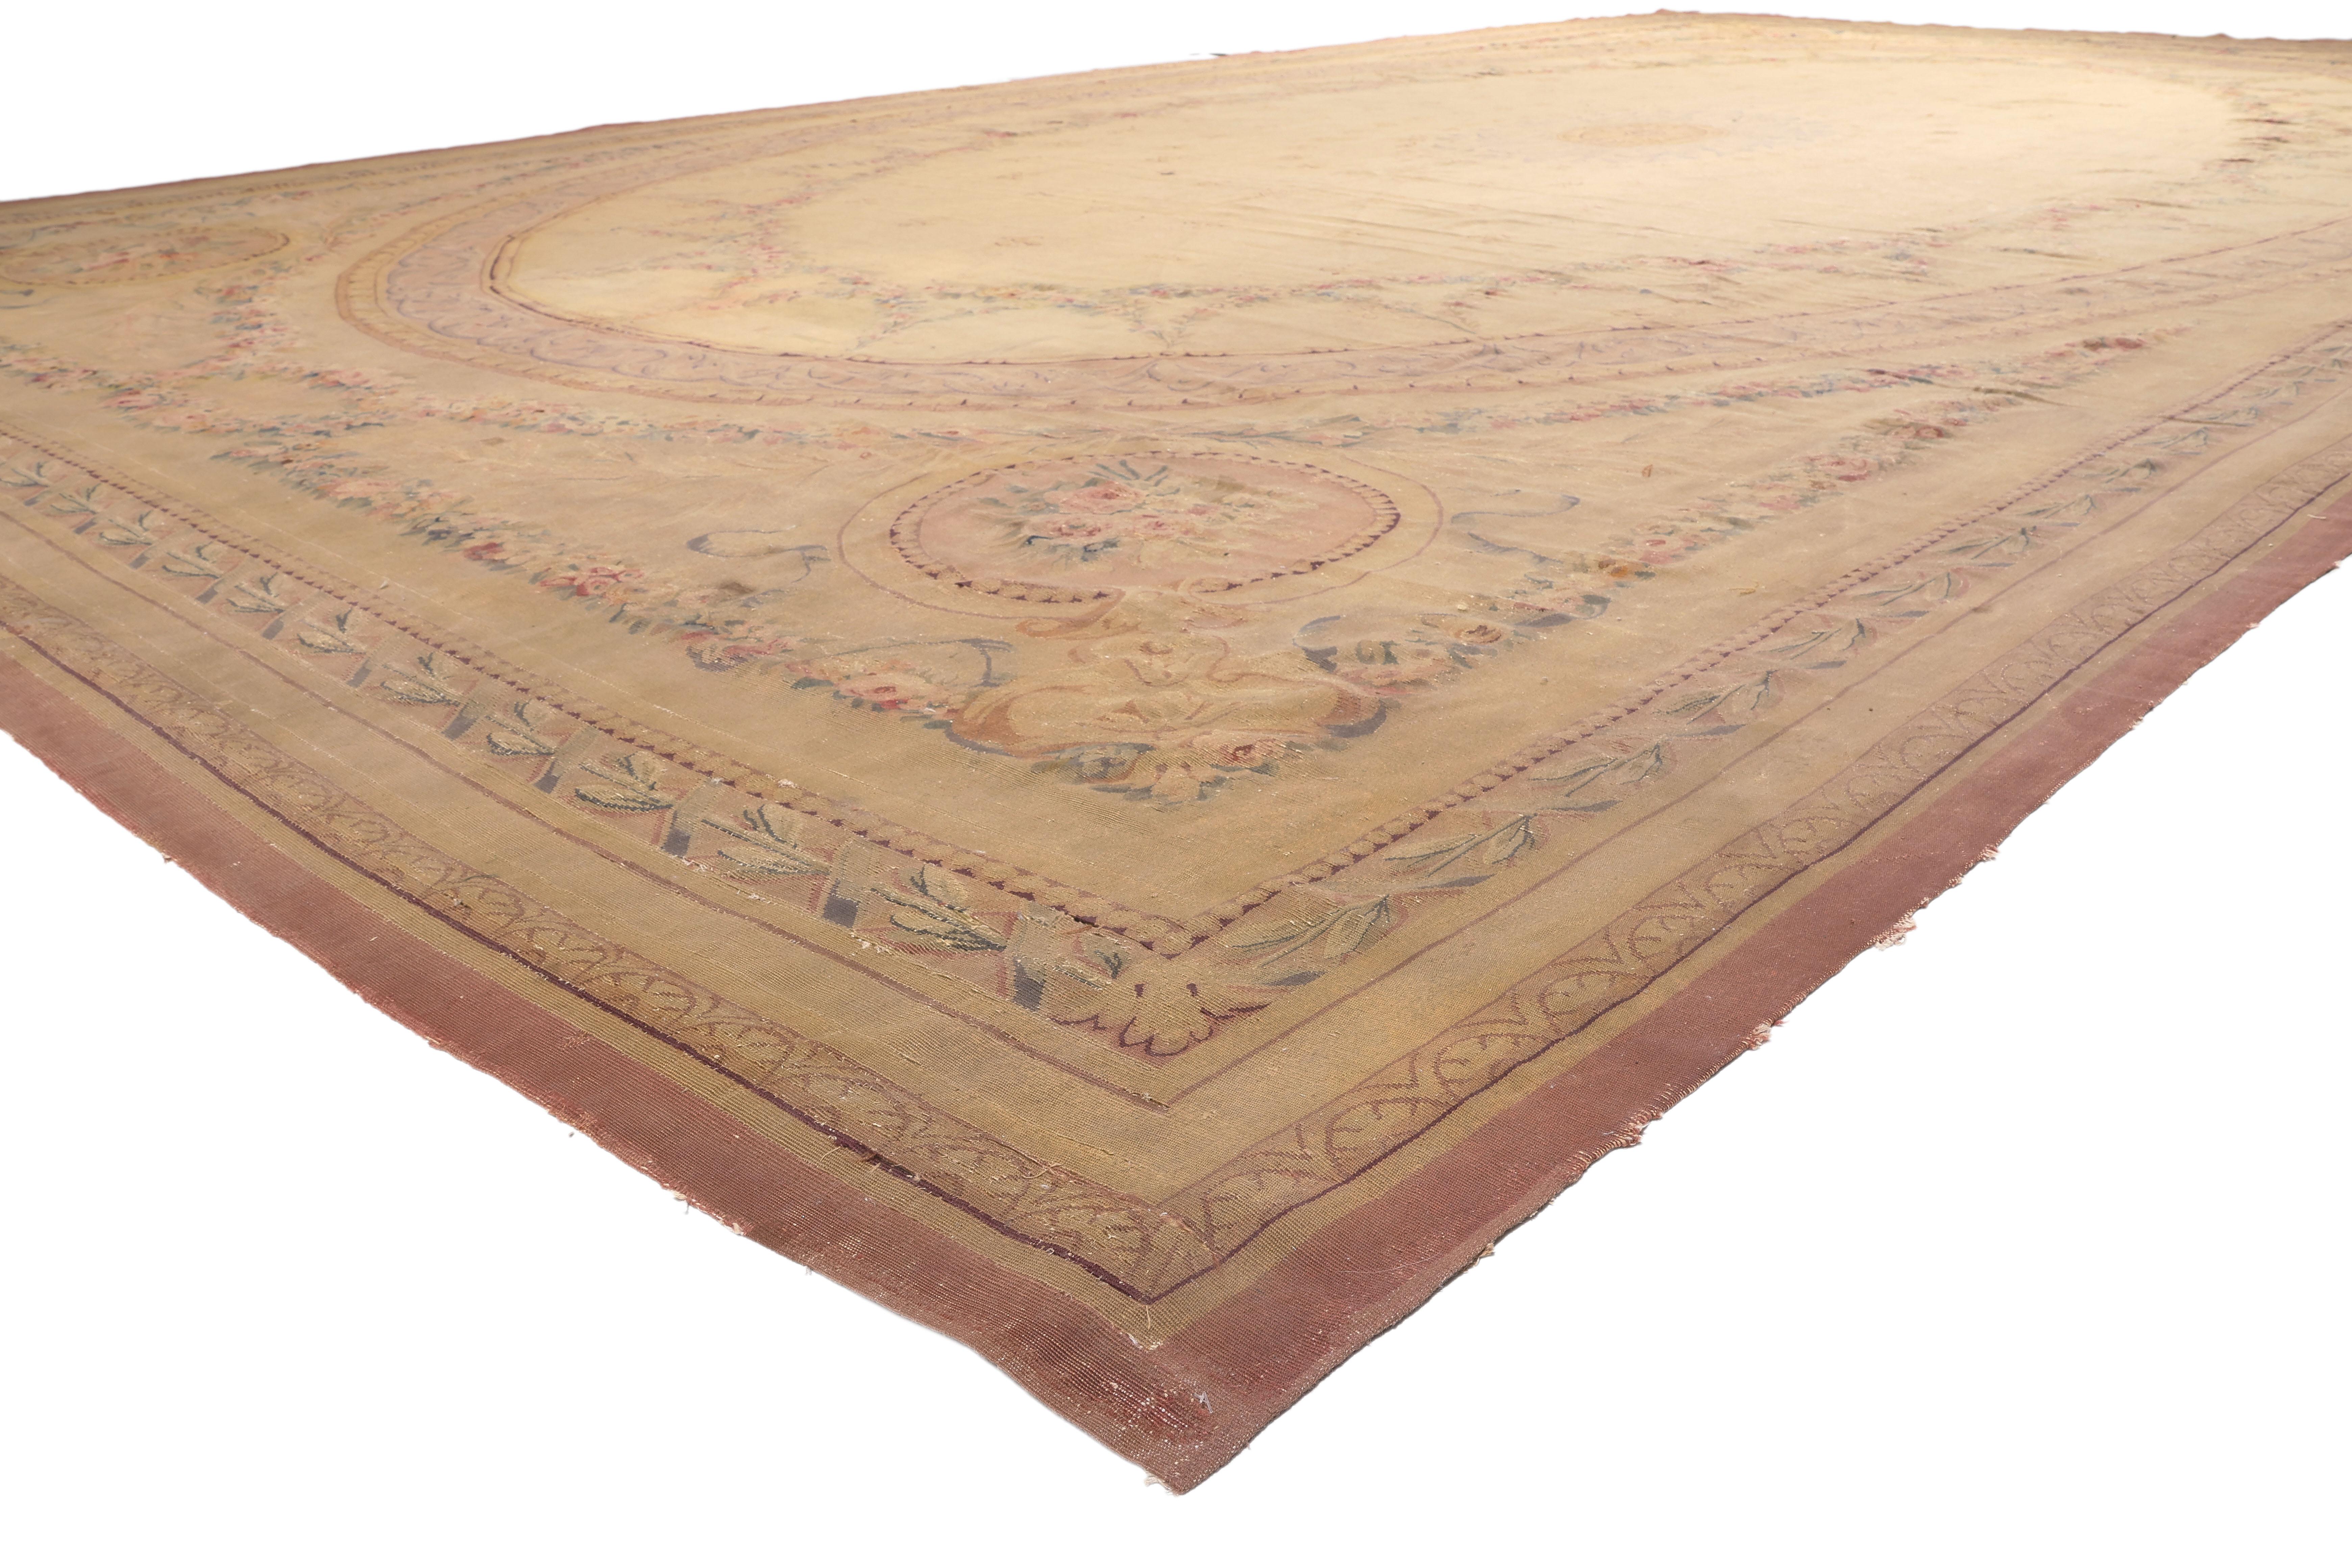 74394 Late 19th Century Antique Aubusson Rug, 14'06 x 25'03. A French Aubusson rug refers to a type of flat-weave rug that originated in the town of Aubusson, located in the Creuse region of central France. These rugs have a long history dating back